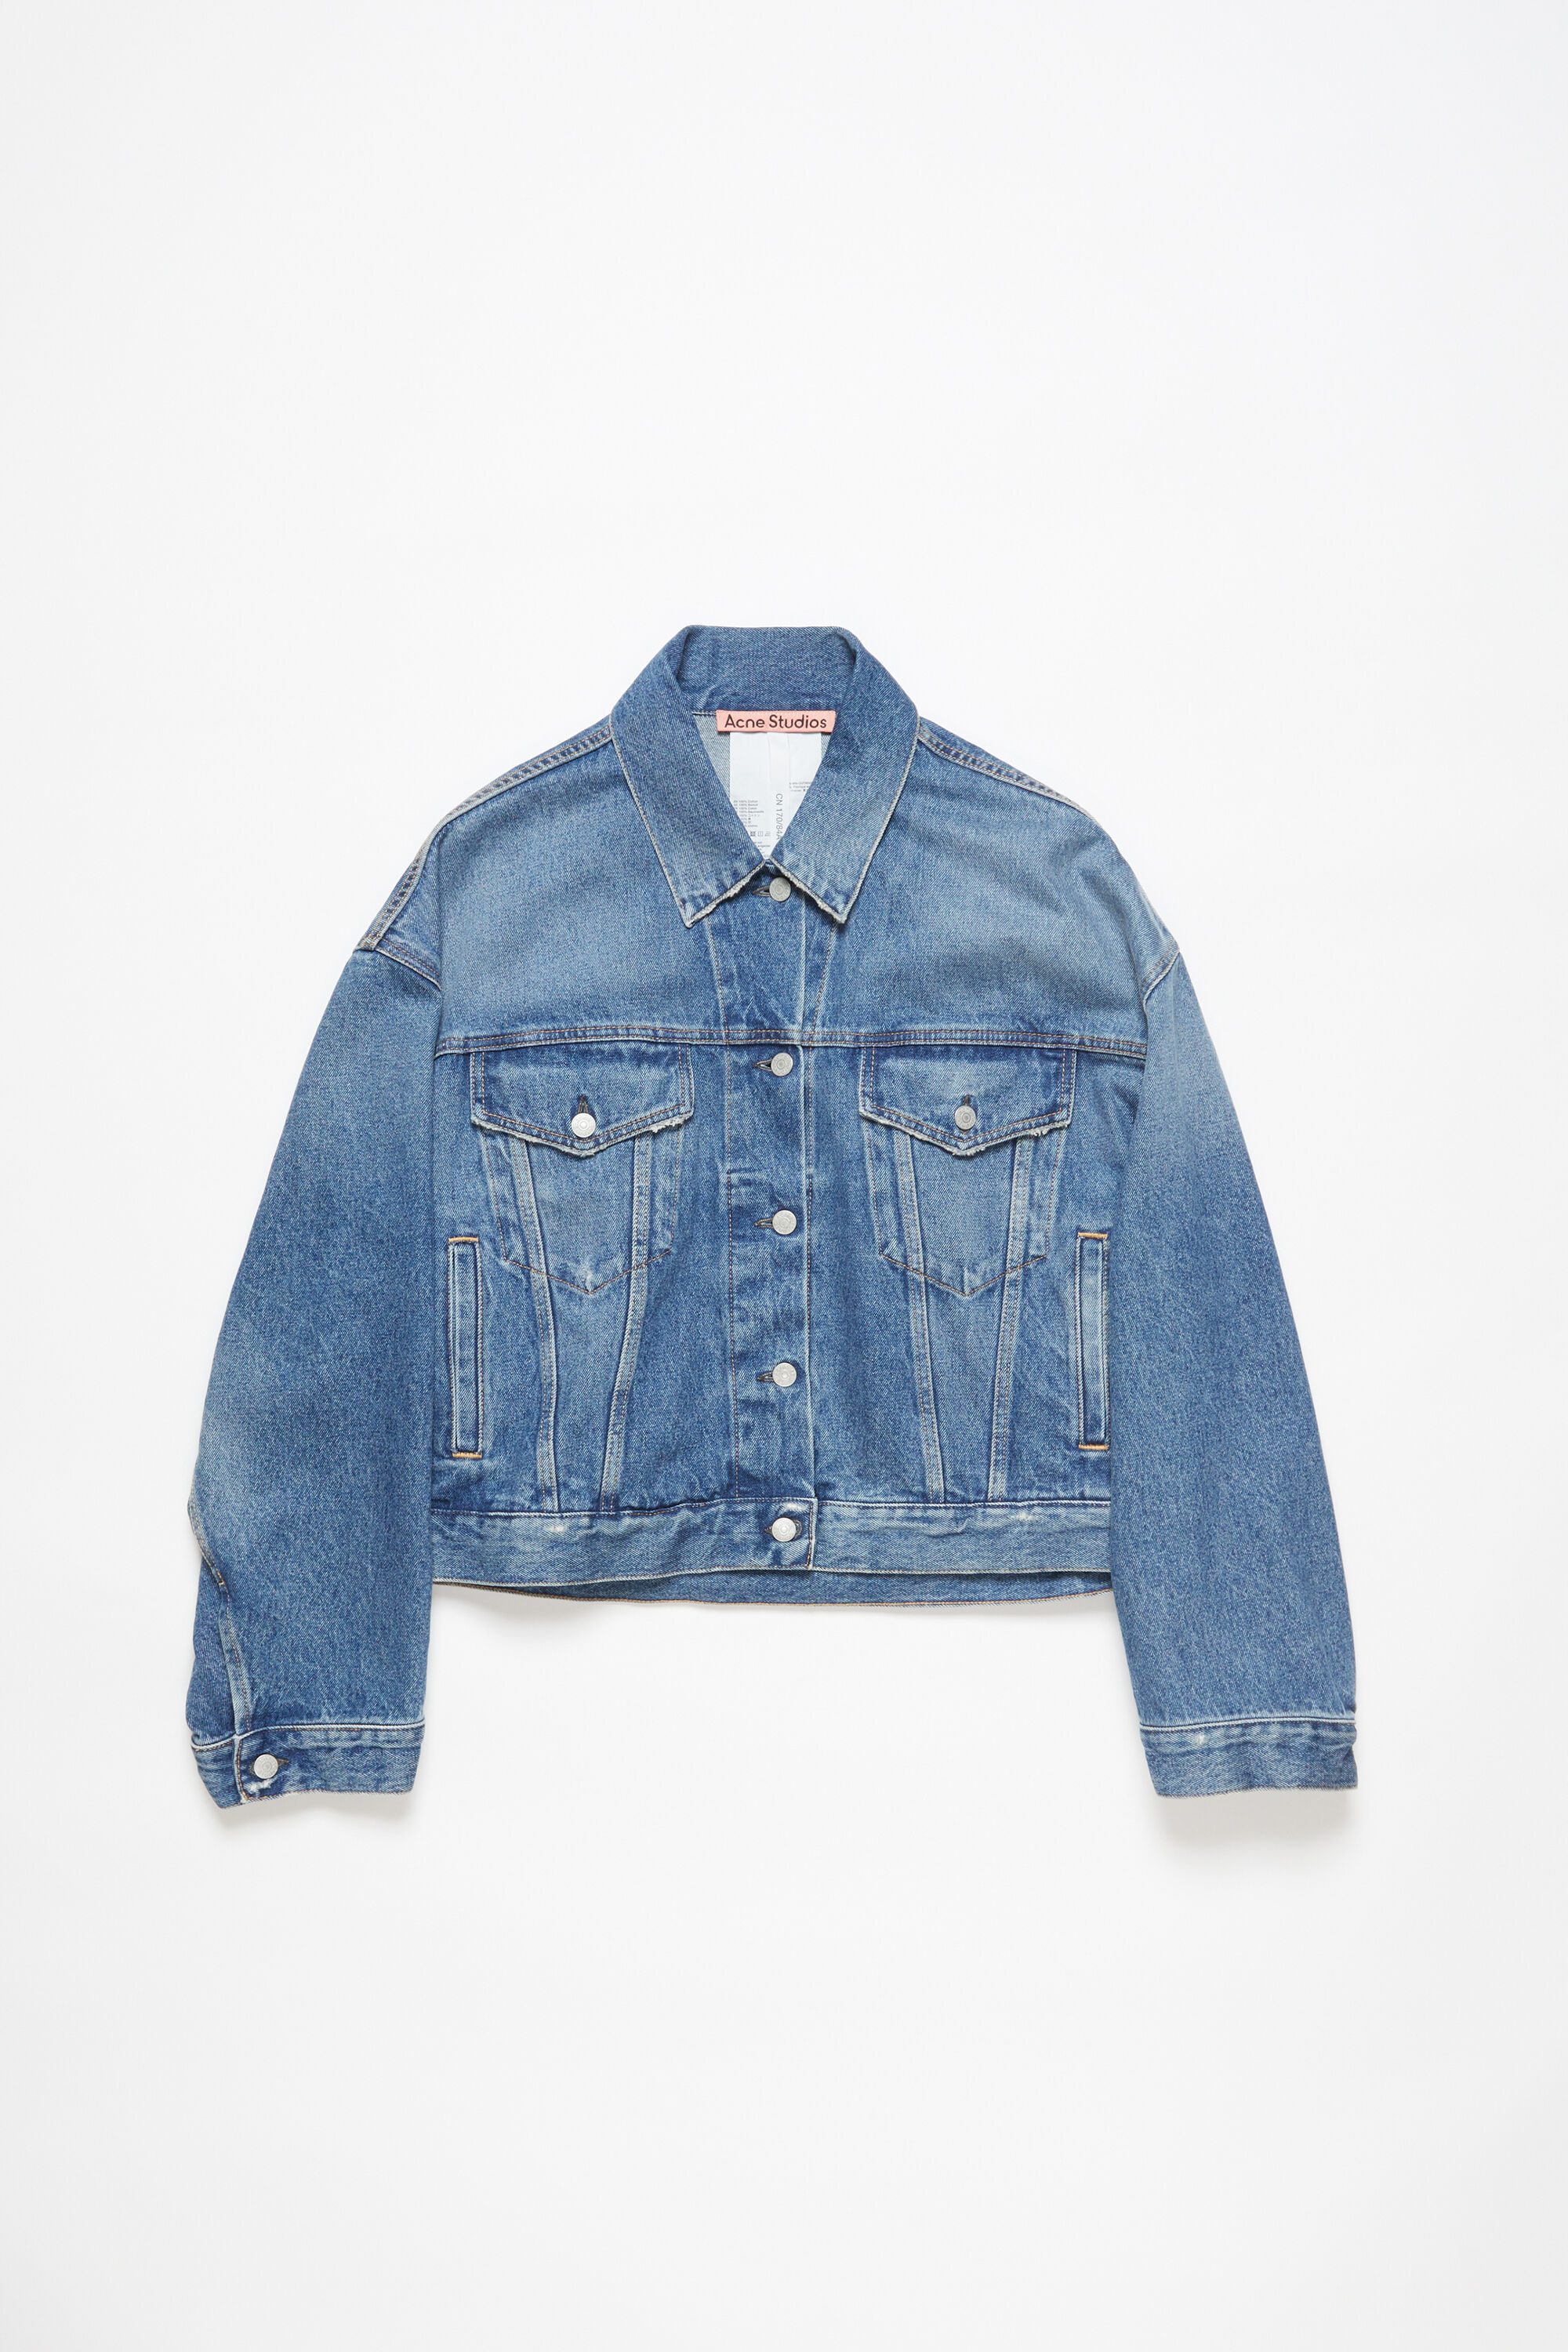 ASOS DESIGN cropped denim jacket in light wash with rips - ShopStyle